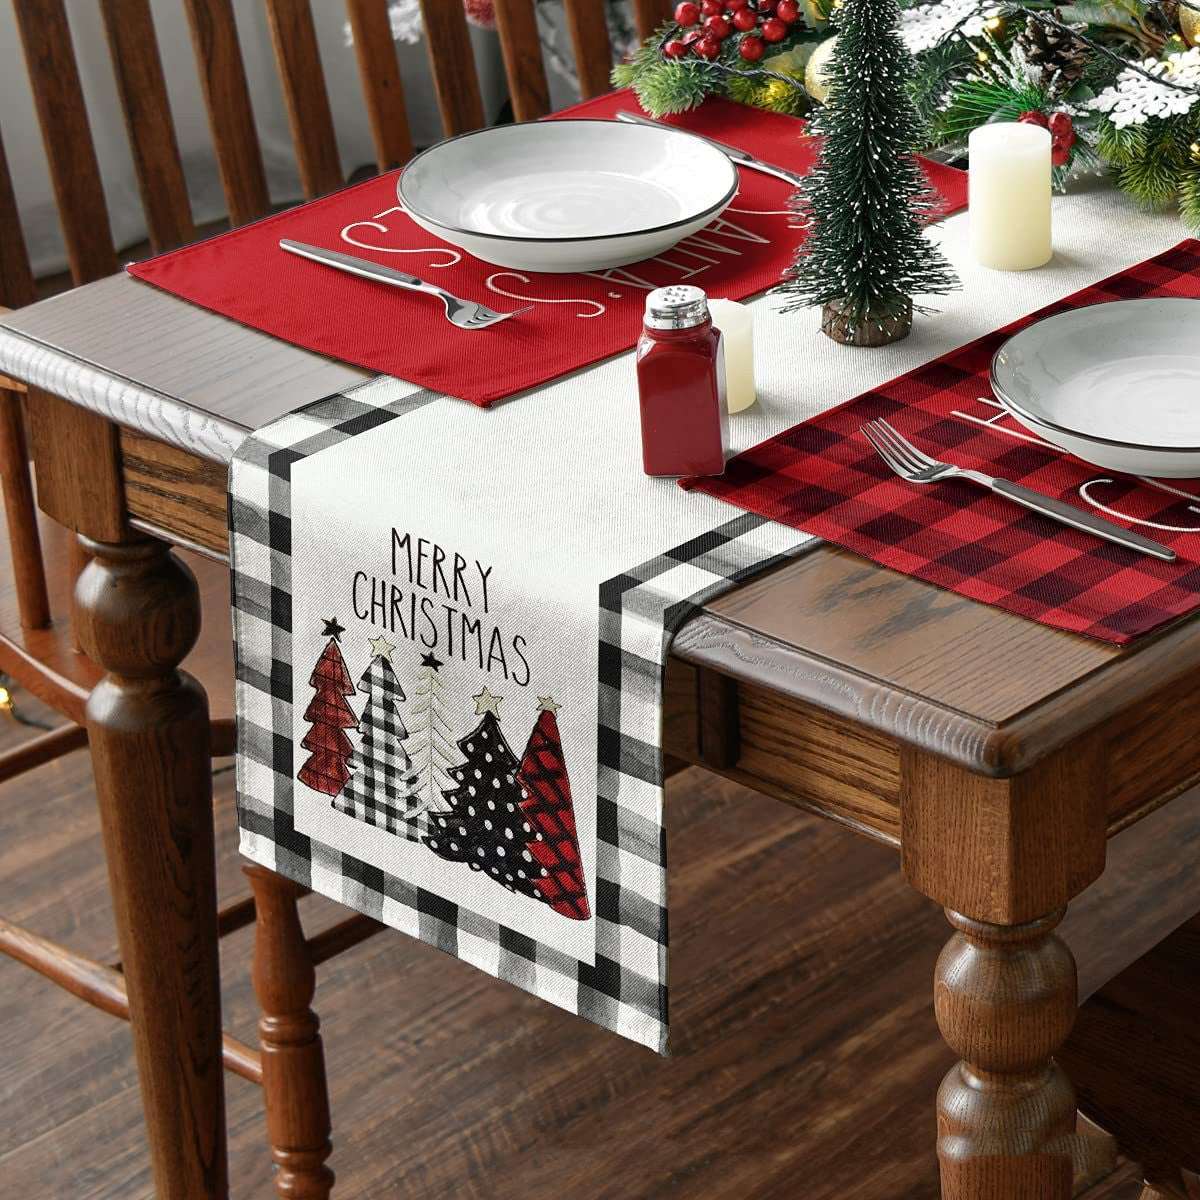 American Fashion Linen Tablecloth Mat Christmas, Outdoor and Indoor Christmas decorations Items, Christmas ornaments, Christmas tree decorations, salt dough ornaments, Christmas window decorations, cheap Christmas decorations, snowmen, and ornaments.